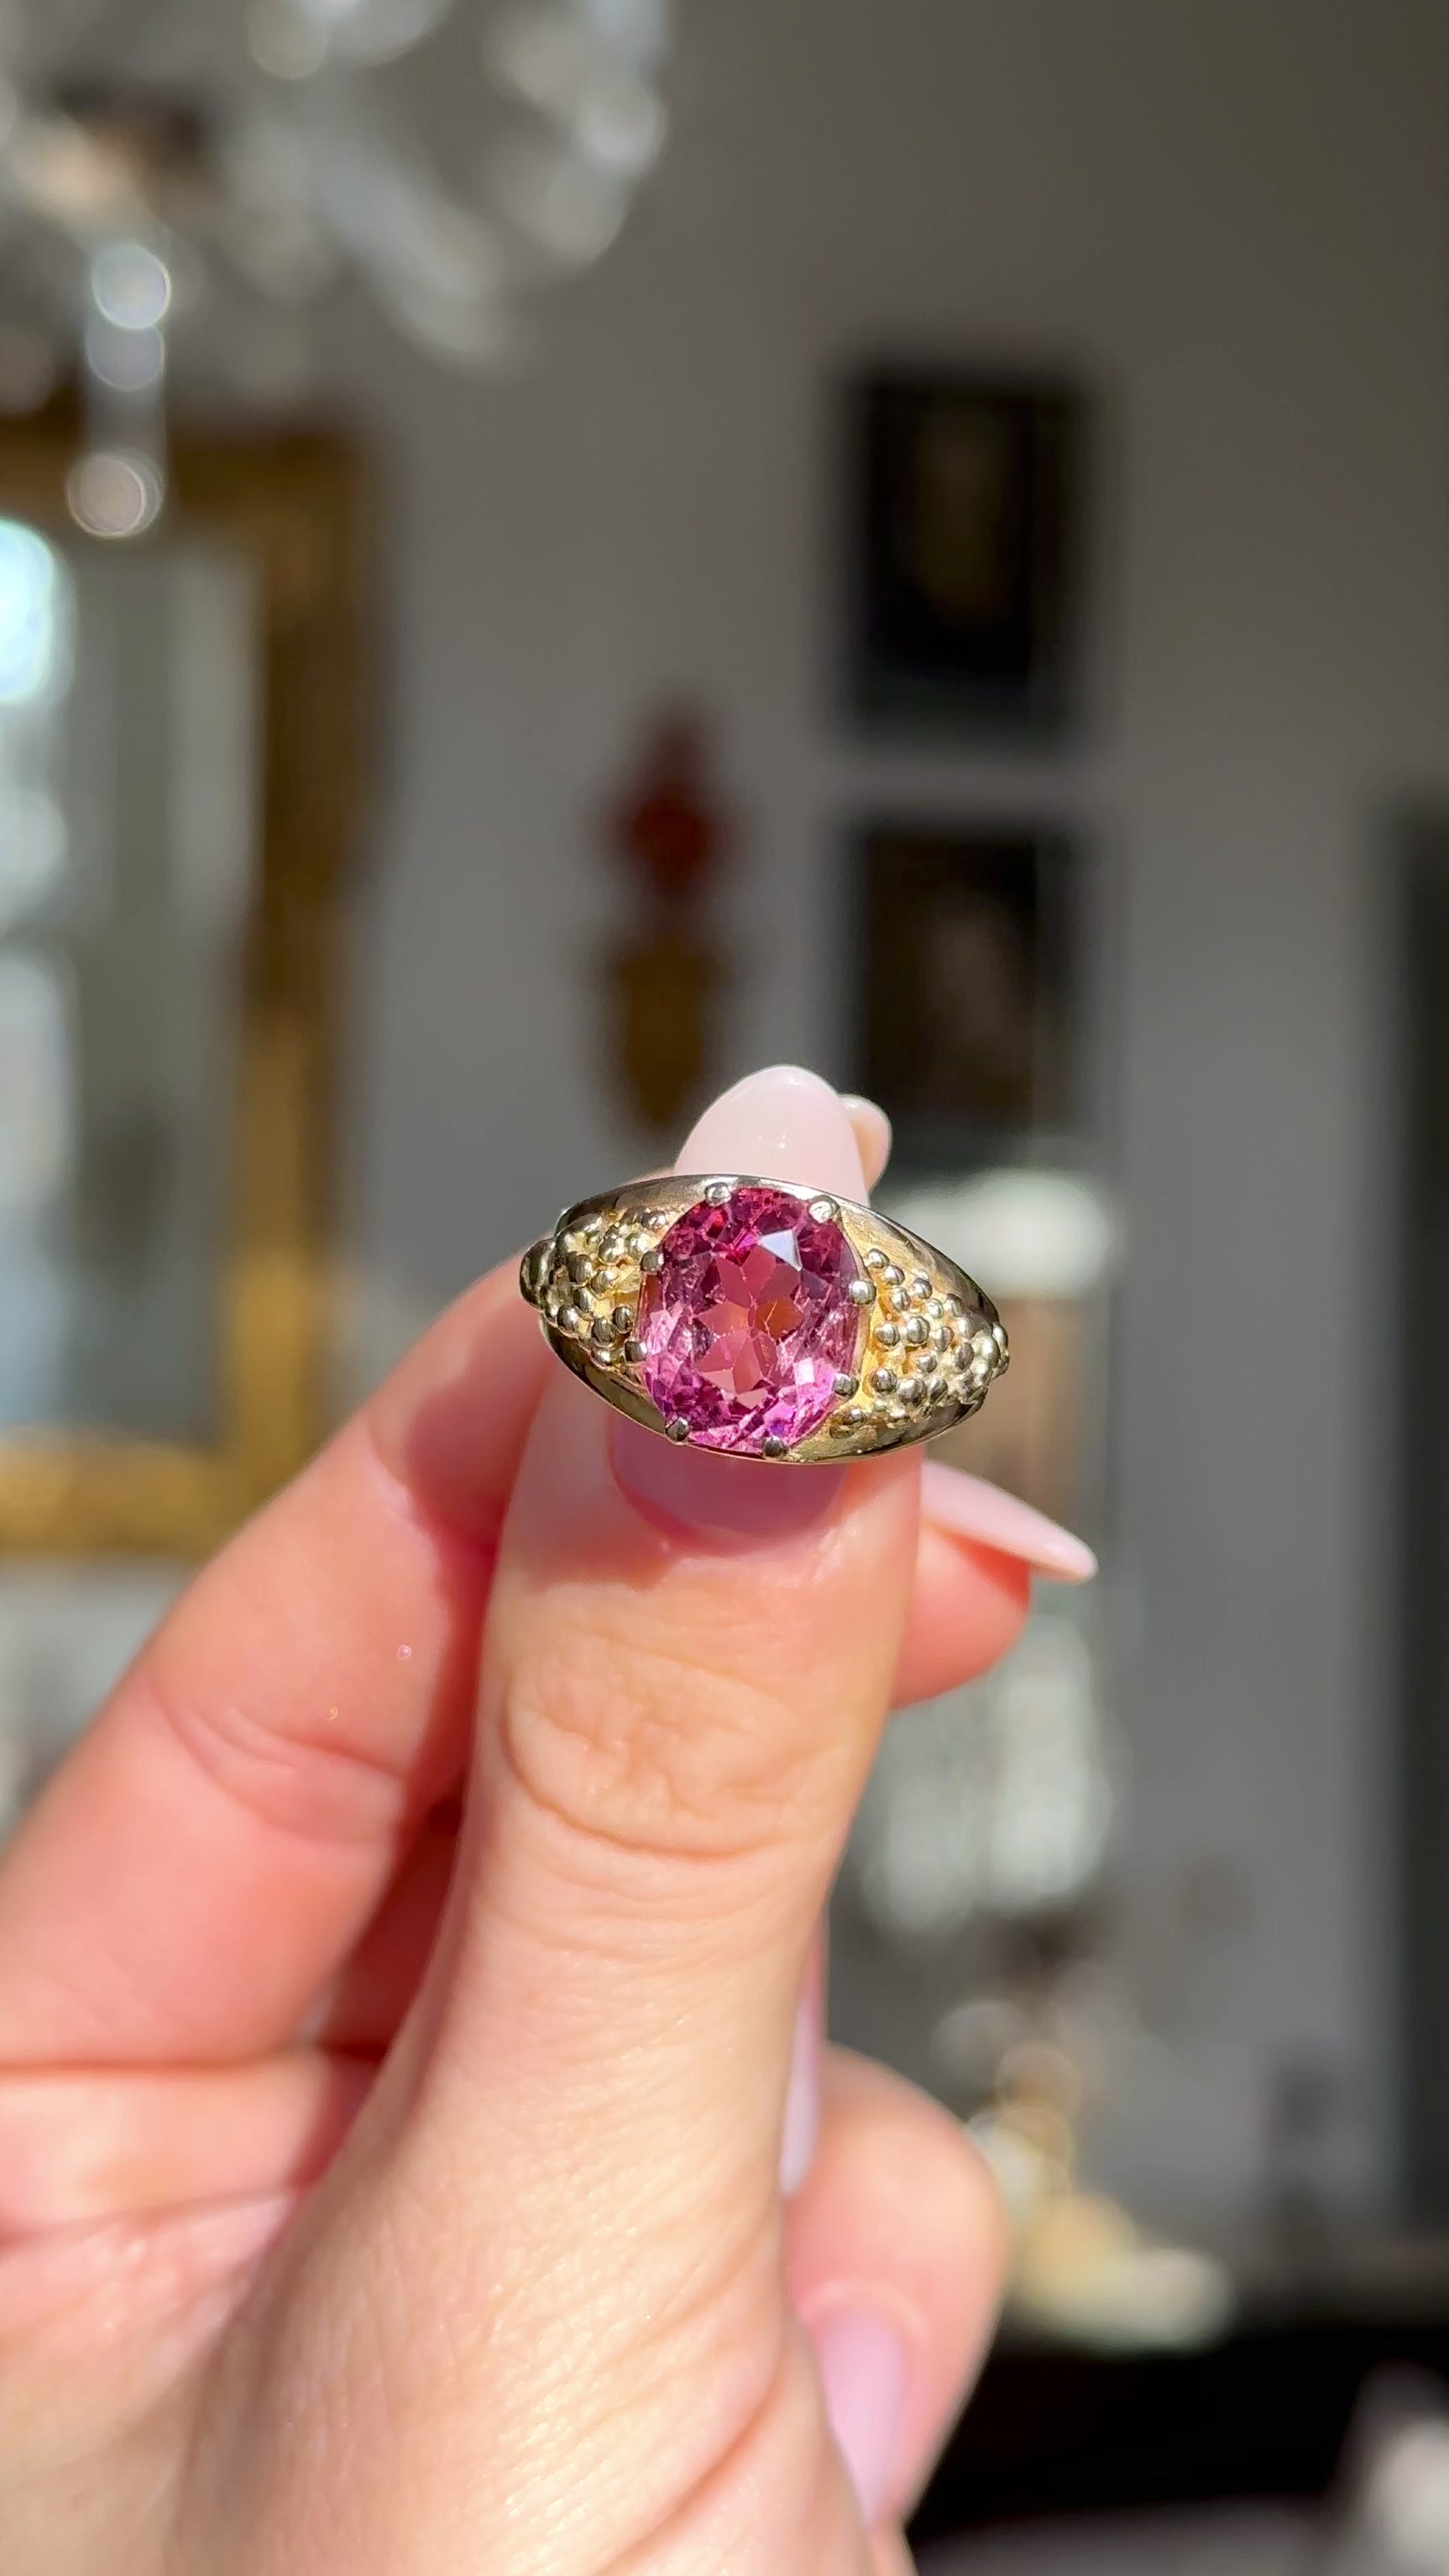 Victorian antique pink tourmaline ring held in fingers and moved around to give perspective.